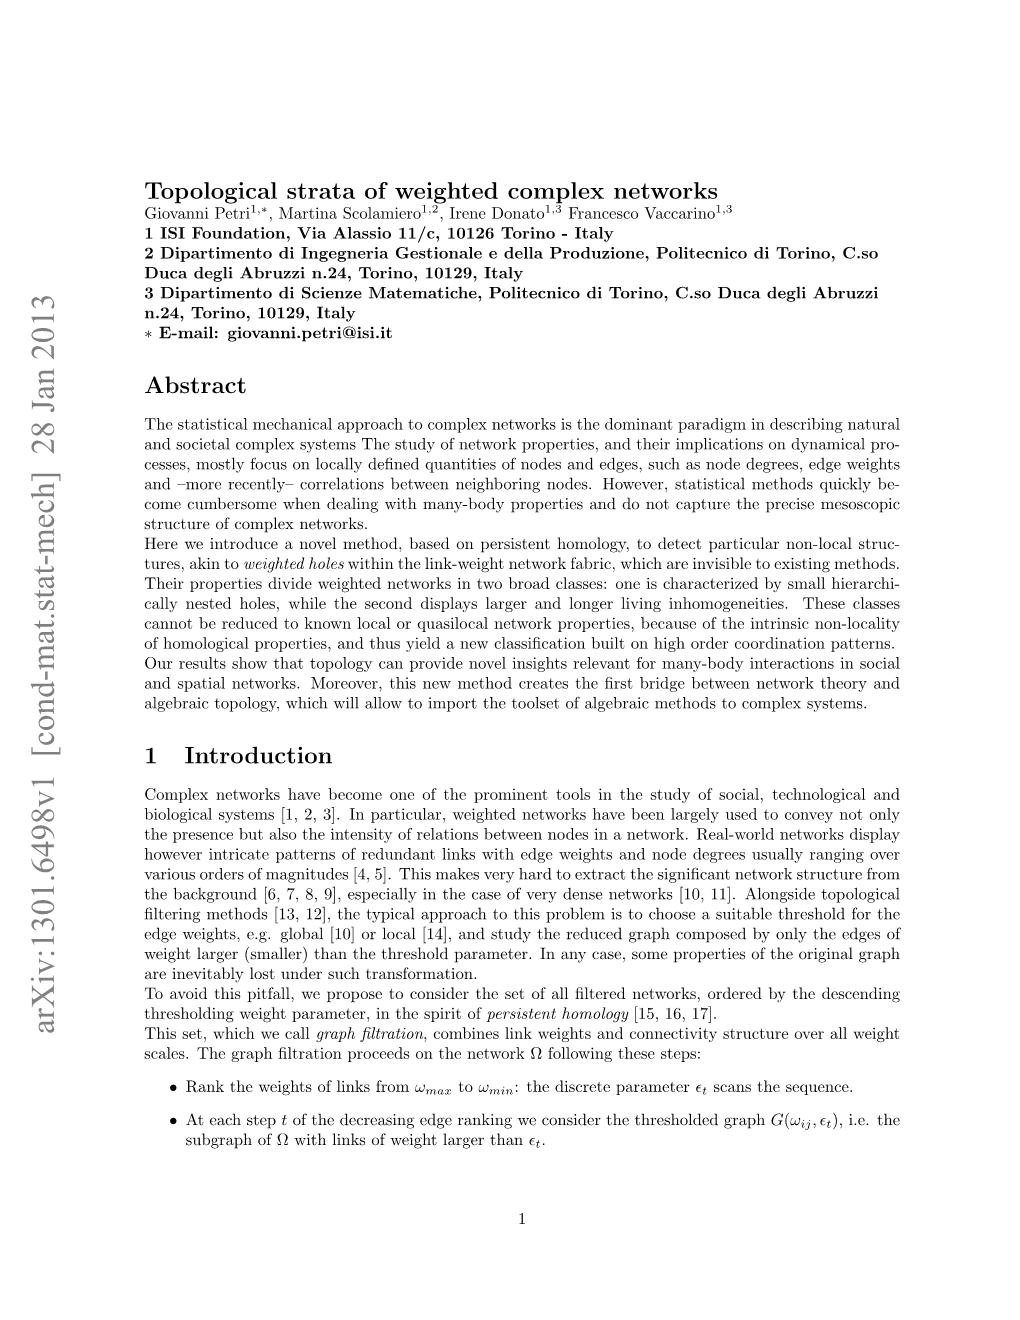 Arxiv:1301.6498V1 [Cond-Mat.Stat-Mech] 28 Jan 2013 This Set, Which We Call Graph ﬁltration, Combines Link Weights and Connectivity Structure Over All Weight Scales